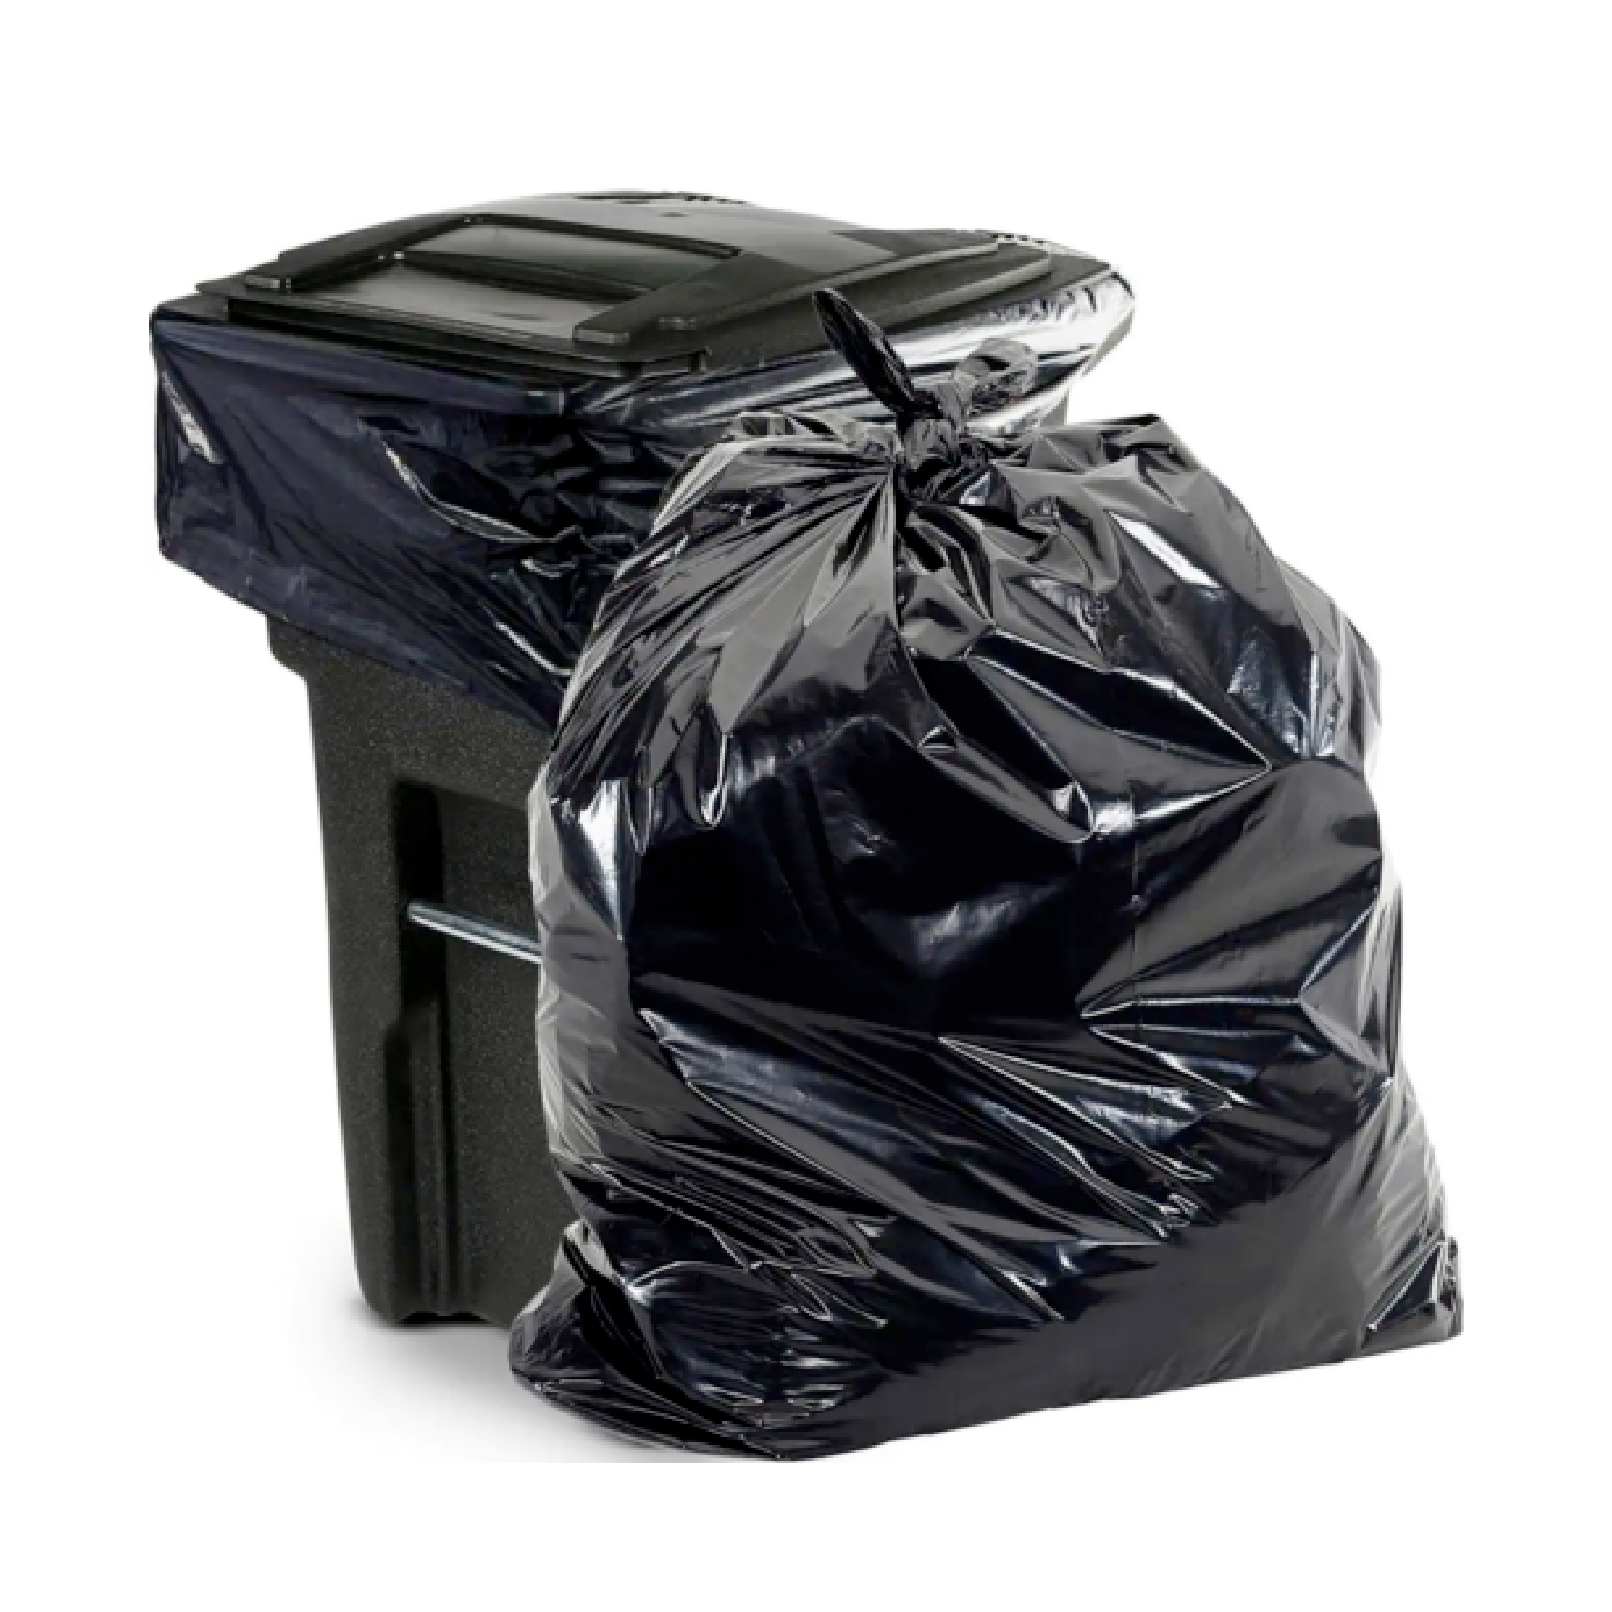 Heavy Duty Black Waste Liners 38x58 - 1.2 mil, 100 bags/case, 60 cases/pallet